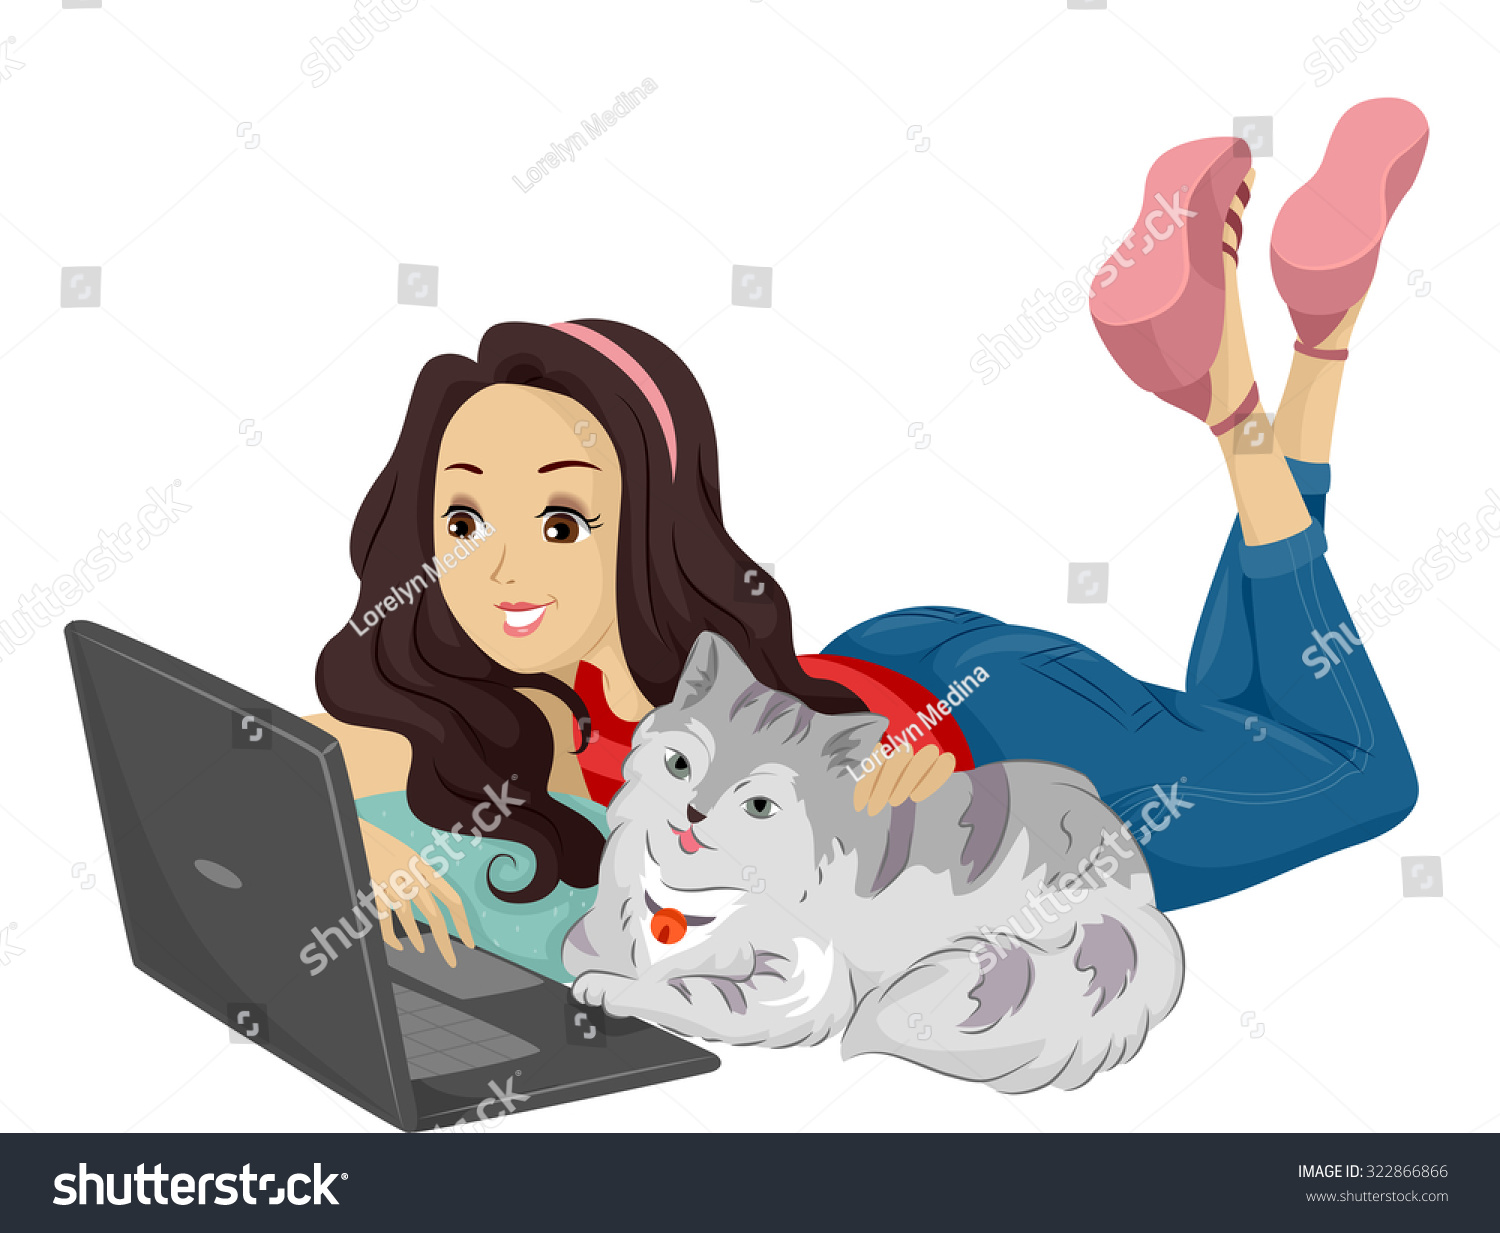 Surfing The Internet Clipart